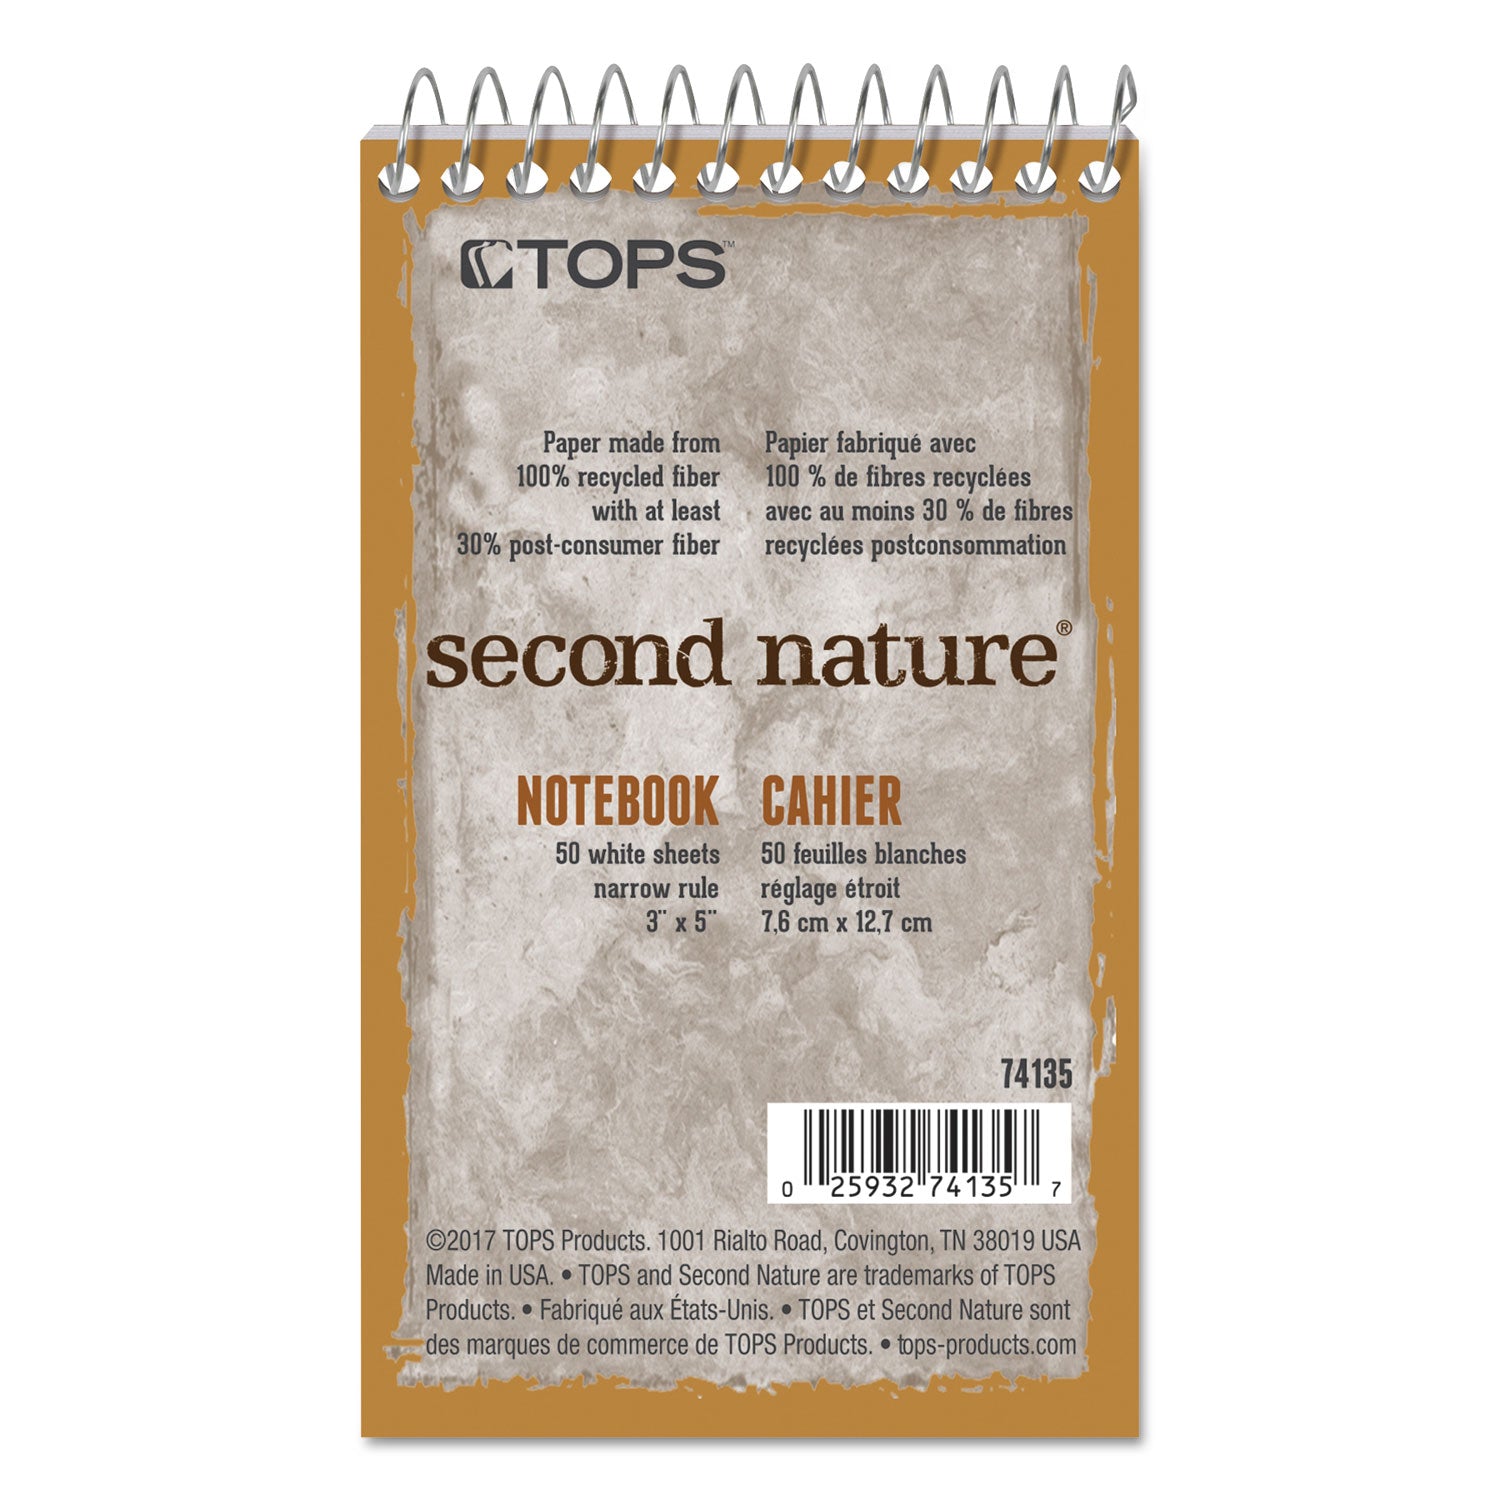 Second Nature Wirebound Notepads, Narrow Rule, Randomly Assorted Cover Colors, 50 White 3 x 5 Sheets - 